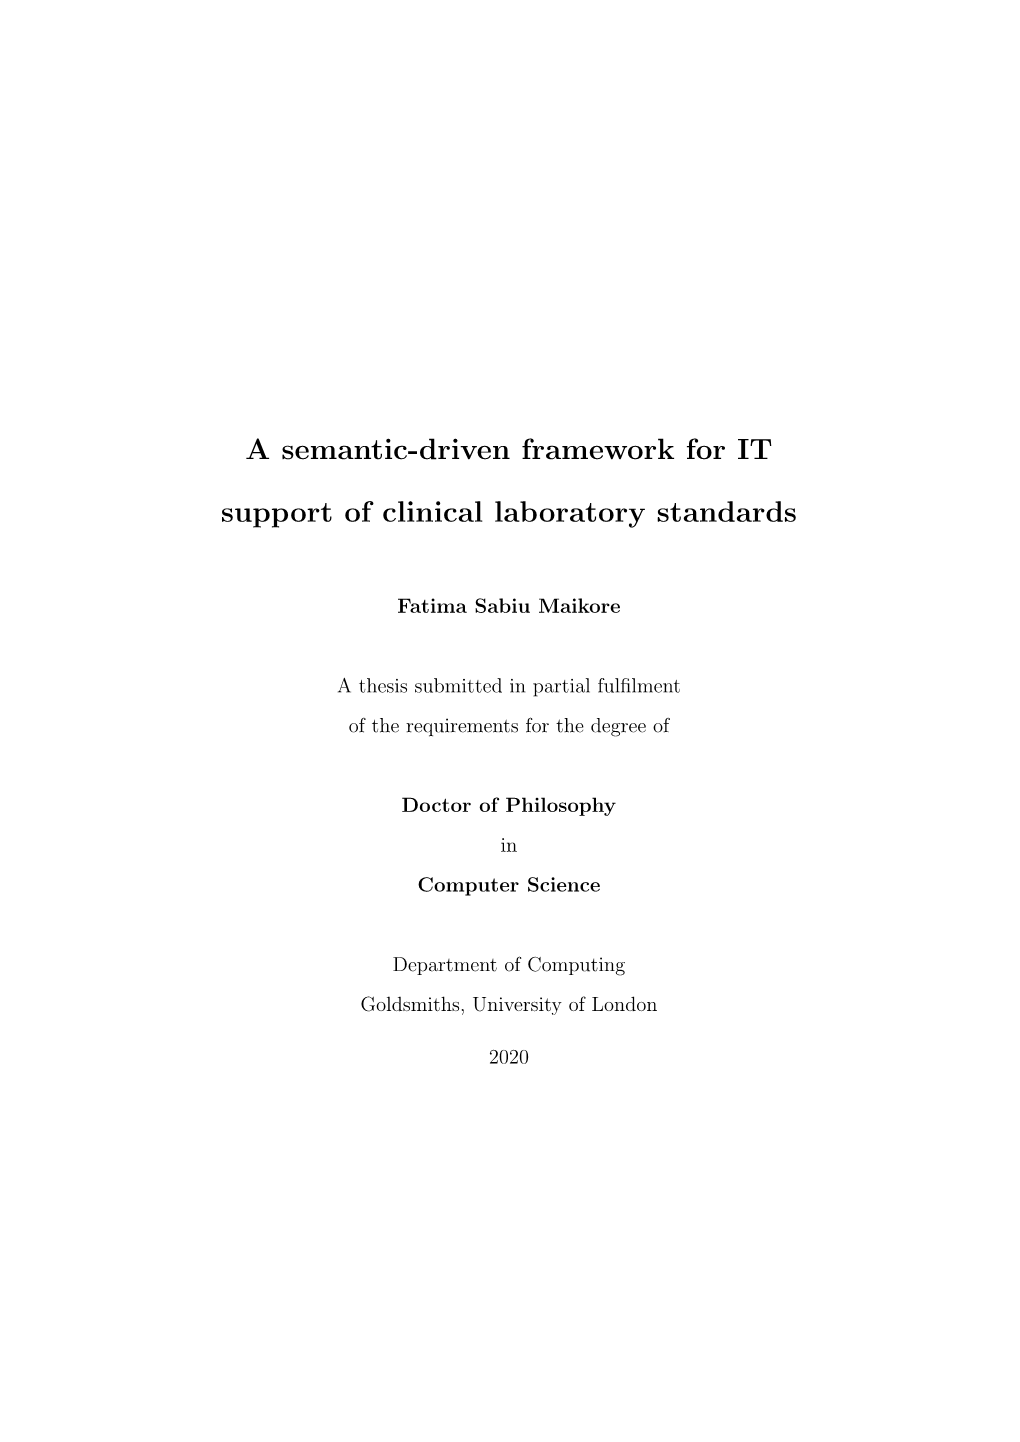 A Semantic-Driven Framework for IT Support of Clinical Laboratory Standards